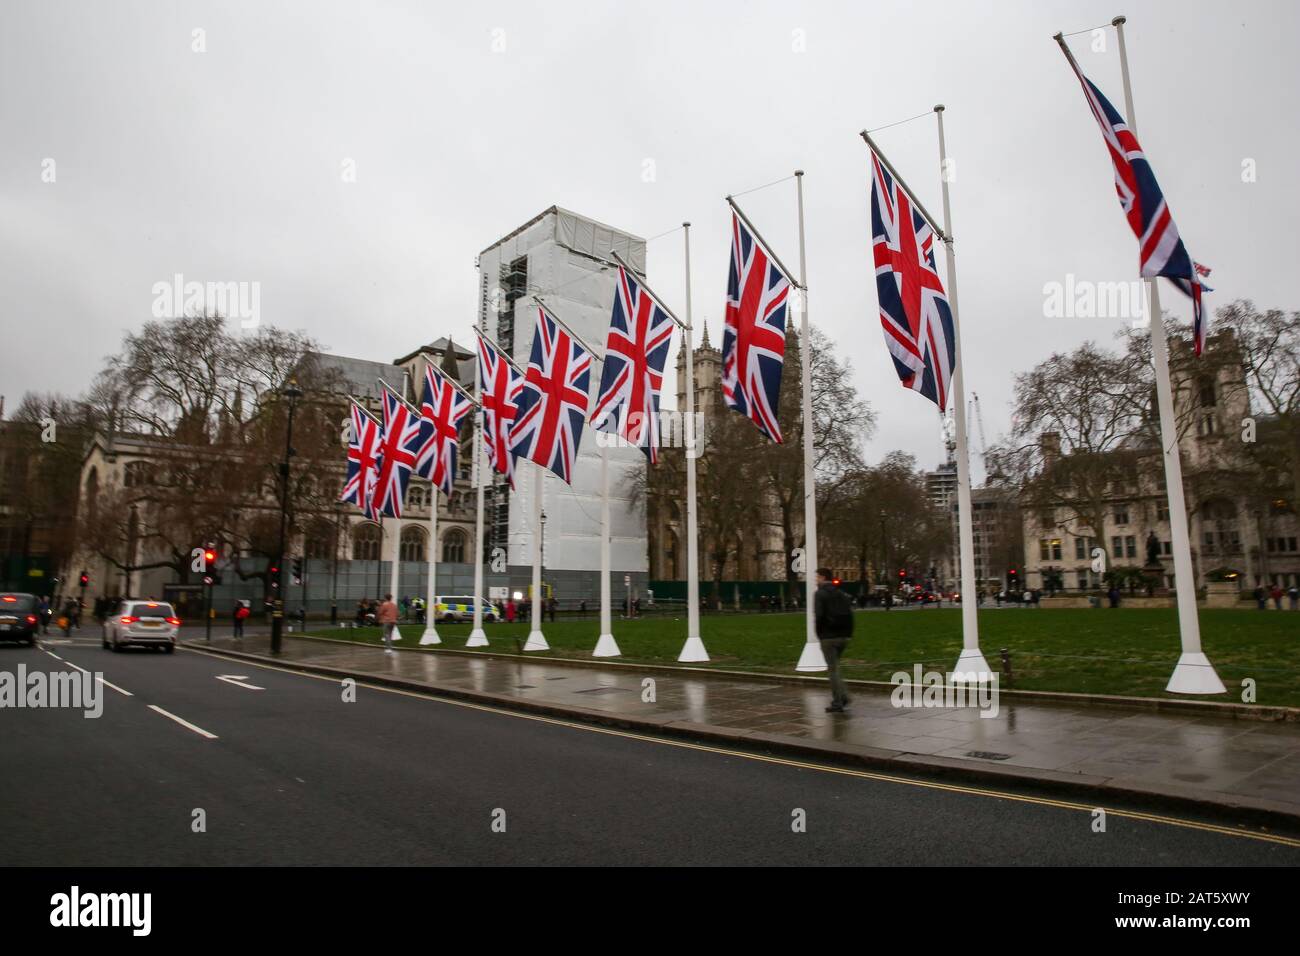 Union Jack flags hang at Parliament Square outside Houses of Parliament on the eve of Brexit Day.Pro-remain supporters with EU flags protest outside Houses of Parliament on the eve of Brexit Day. Britain will officially leave the European Union at 11pm (GMT) on 31 January 2020 and will cease to be a state member. Under the terms of the Withdrawal Agreement, UK will enter a transitional period and will abide by EU rules despite not being a member. Stock Photo